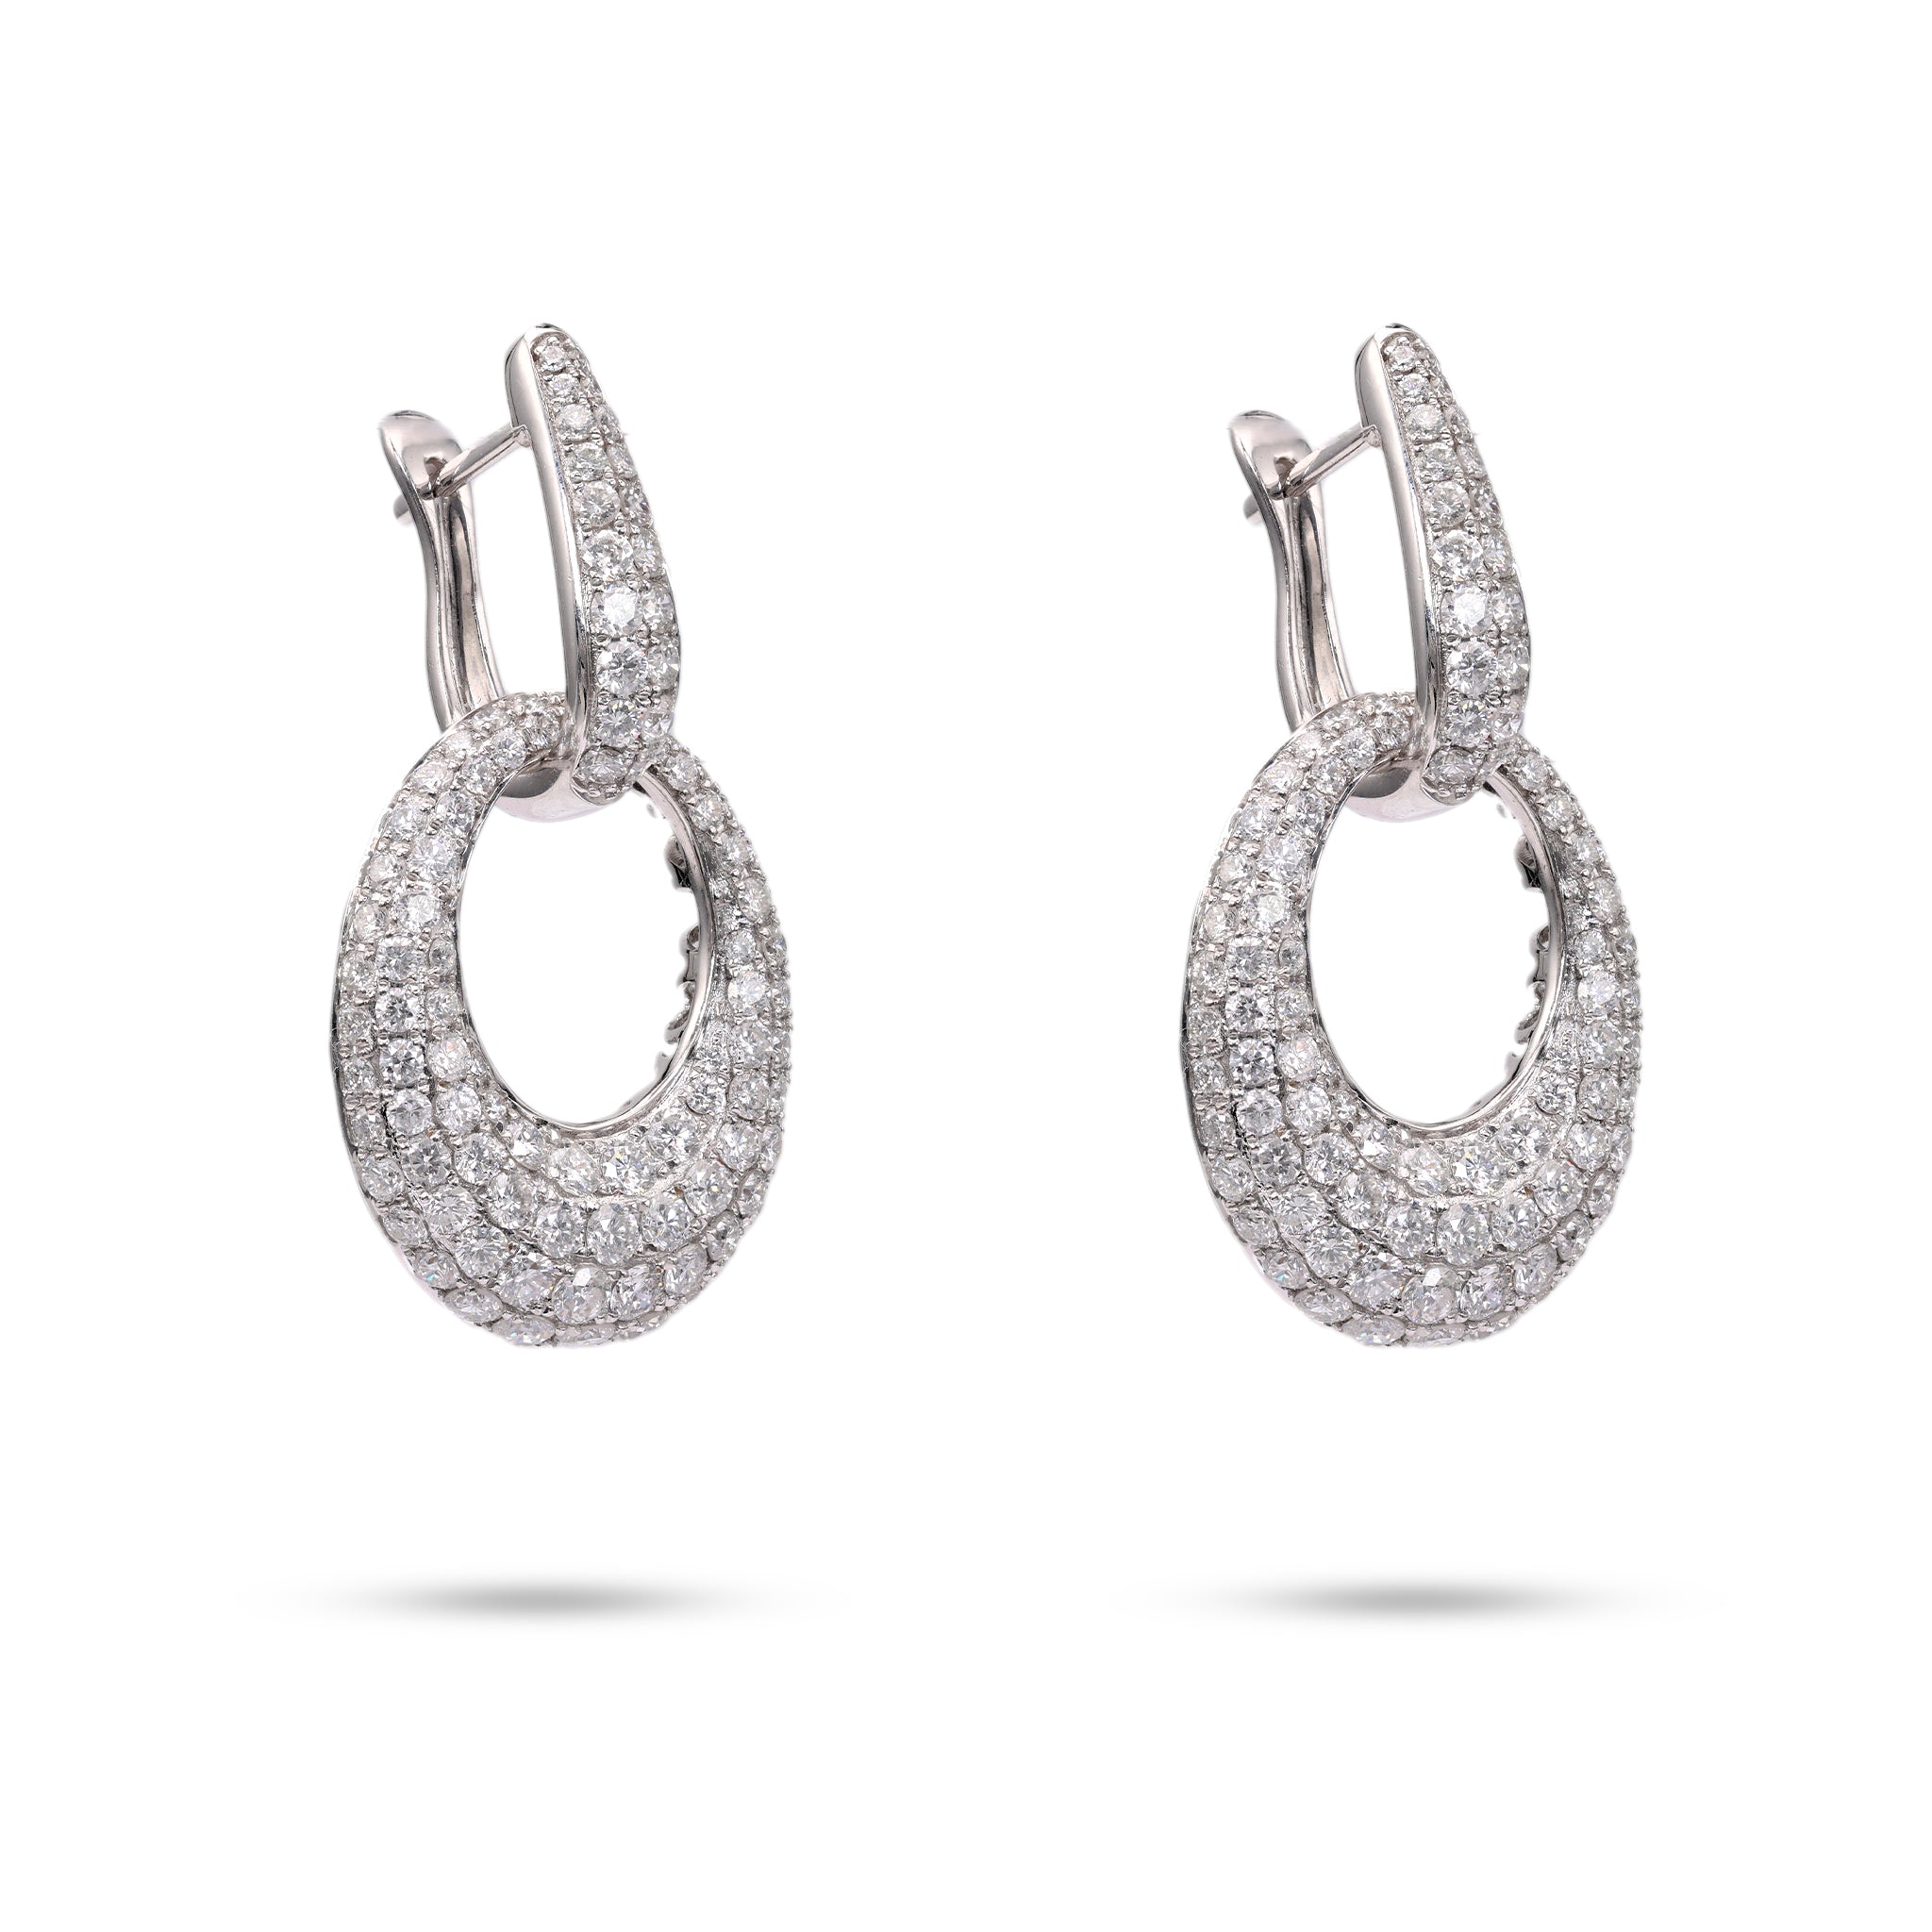 4.99 Carat Total Weight Diamond 18k White Gold Day to Night Earrings